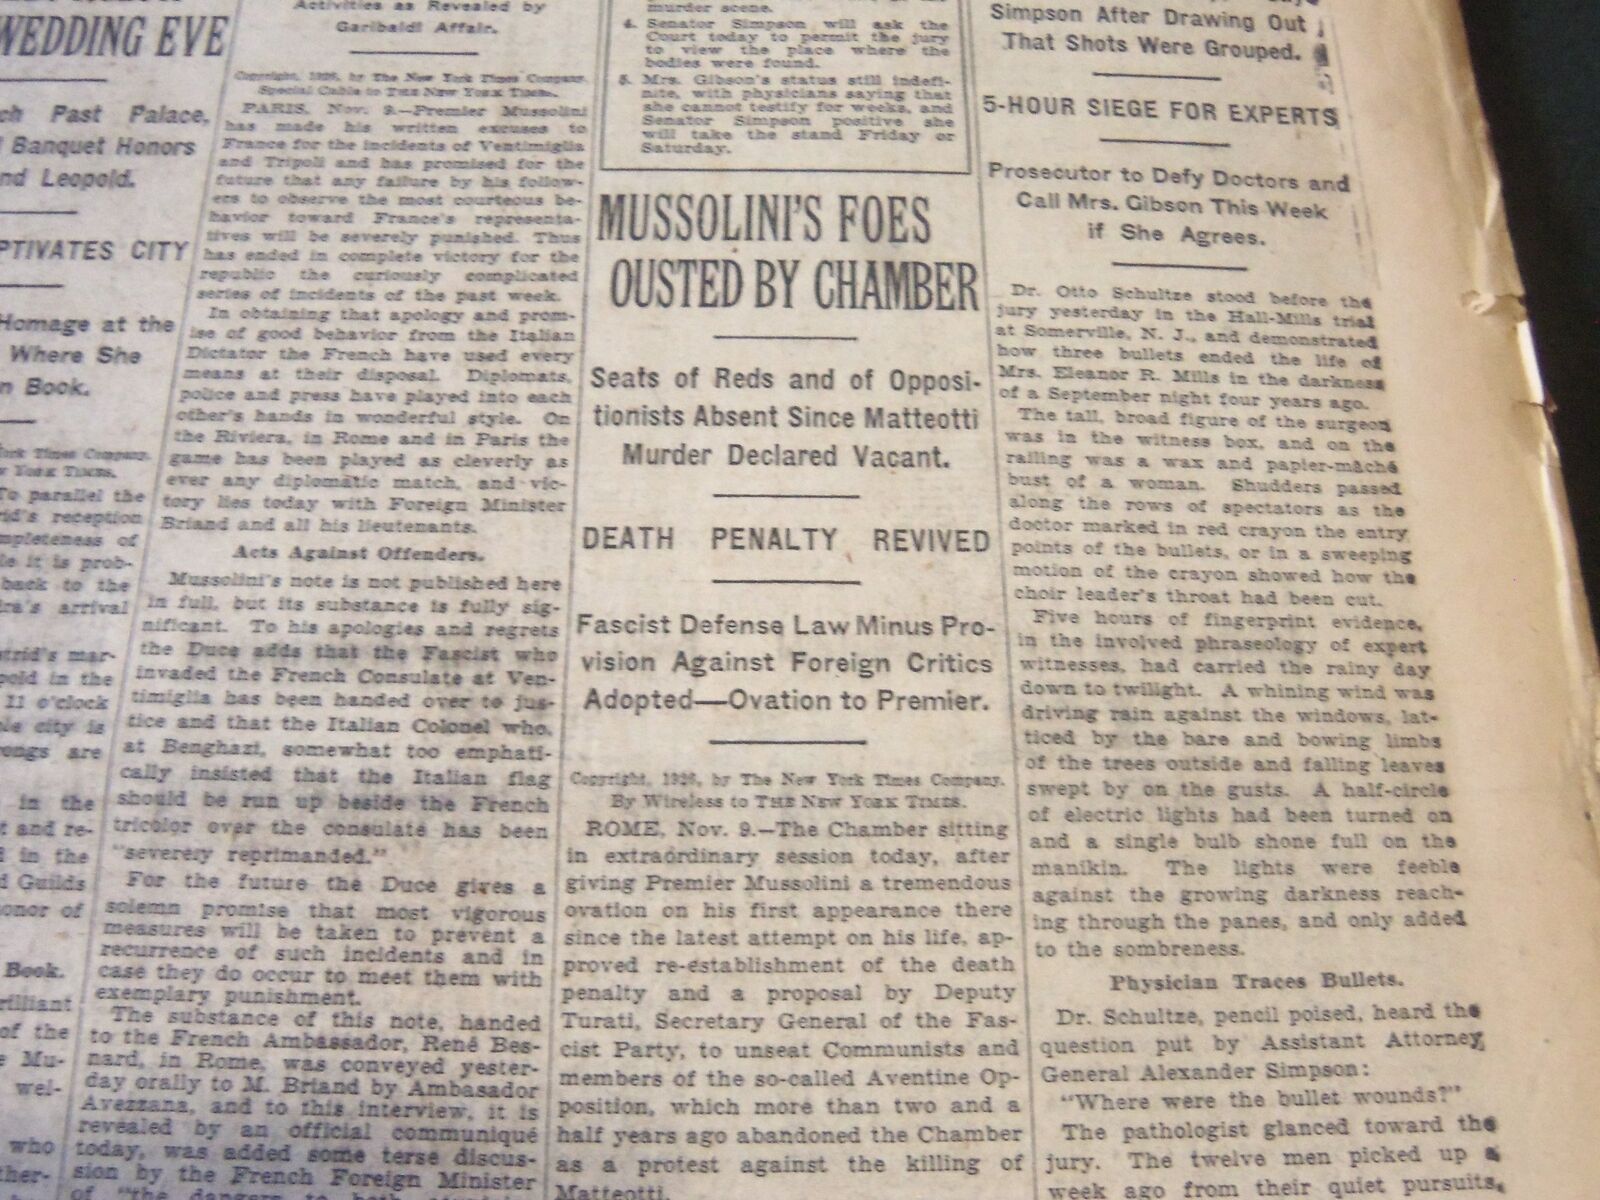 1926 NOV 10 NEW YORK TIMES - MUSSOLINI'S FOES OUSTED BY CHAMBER - NT 6538